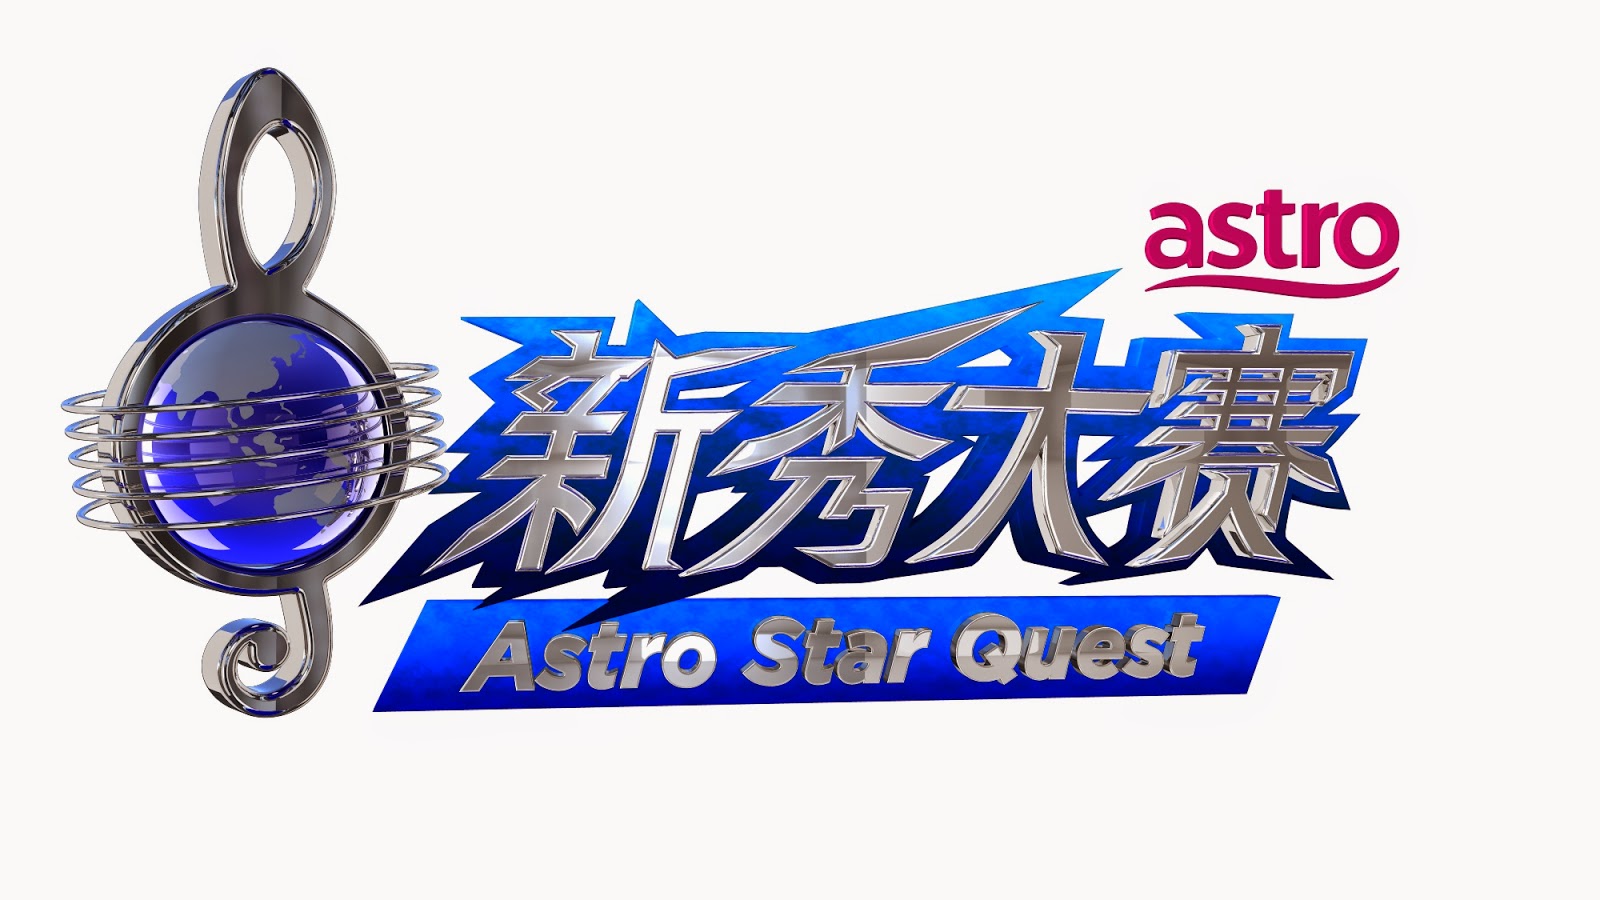 [Official Press Release] Astro Star Quest 2015 Online Audition is Open now till 5 April 2015 In Search for the Next Multi-talented Star!